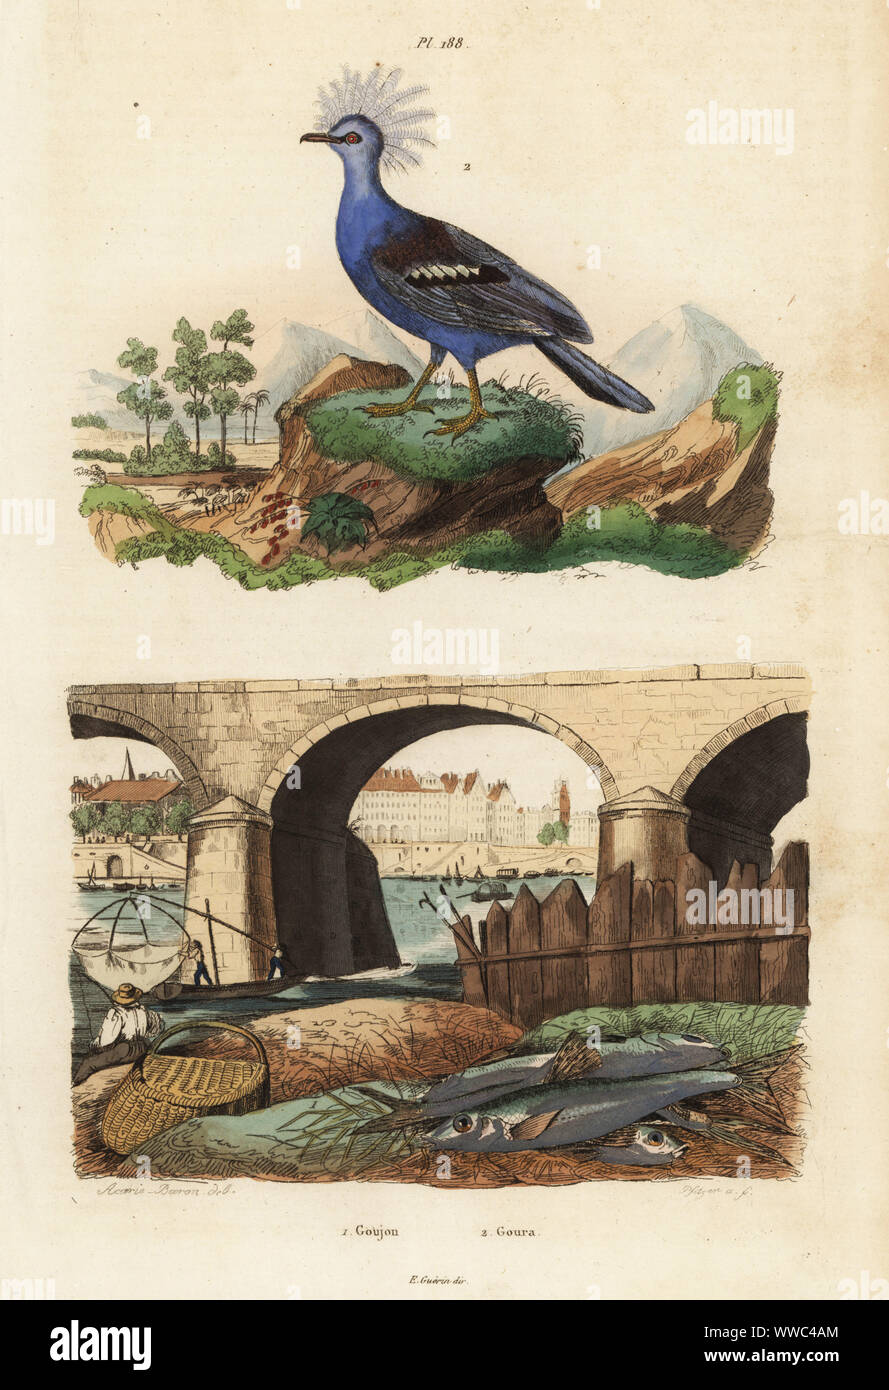 Fishermen fishing with nets under a bridge for gudgeon, Le goujon, Gobio gobio 1, and western crowned pigeon, le Goura couronne, Goura cristata 2. Handcoloured steel engraving by Pfitzer after an illustration by A. Carie Baron from Felix-Edouard Guerin-Meneville's Dictionnaire Pittoresque d'Histoire Naturelle (Picturesque Dictionary of Natural History), Paris, 1834-39. Stock Photo